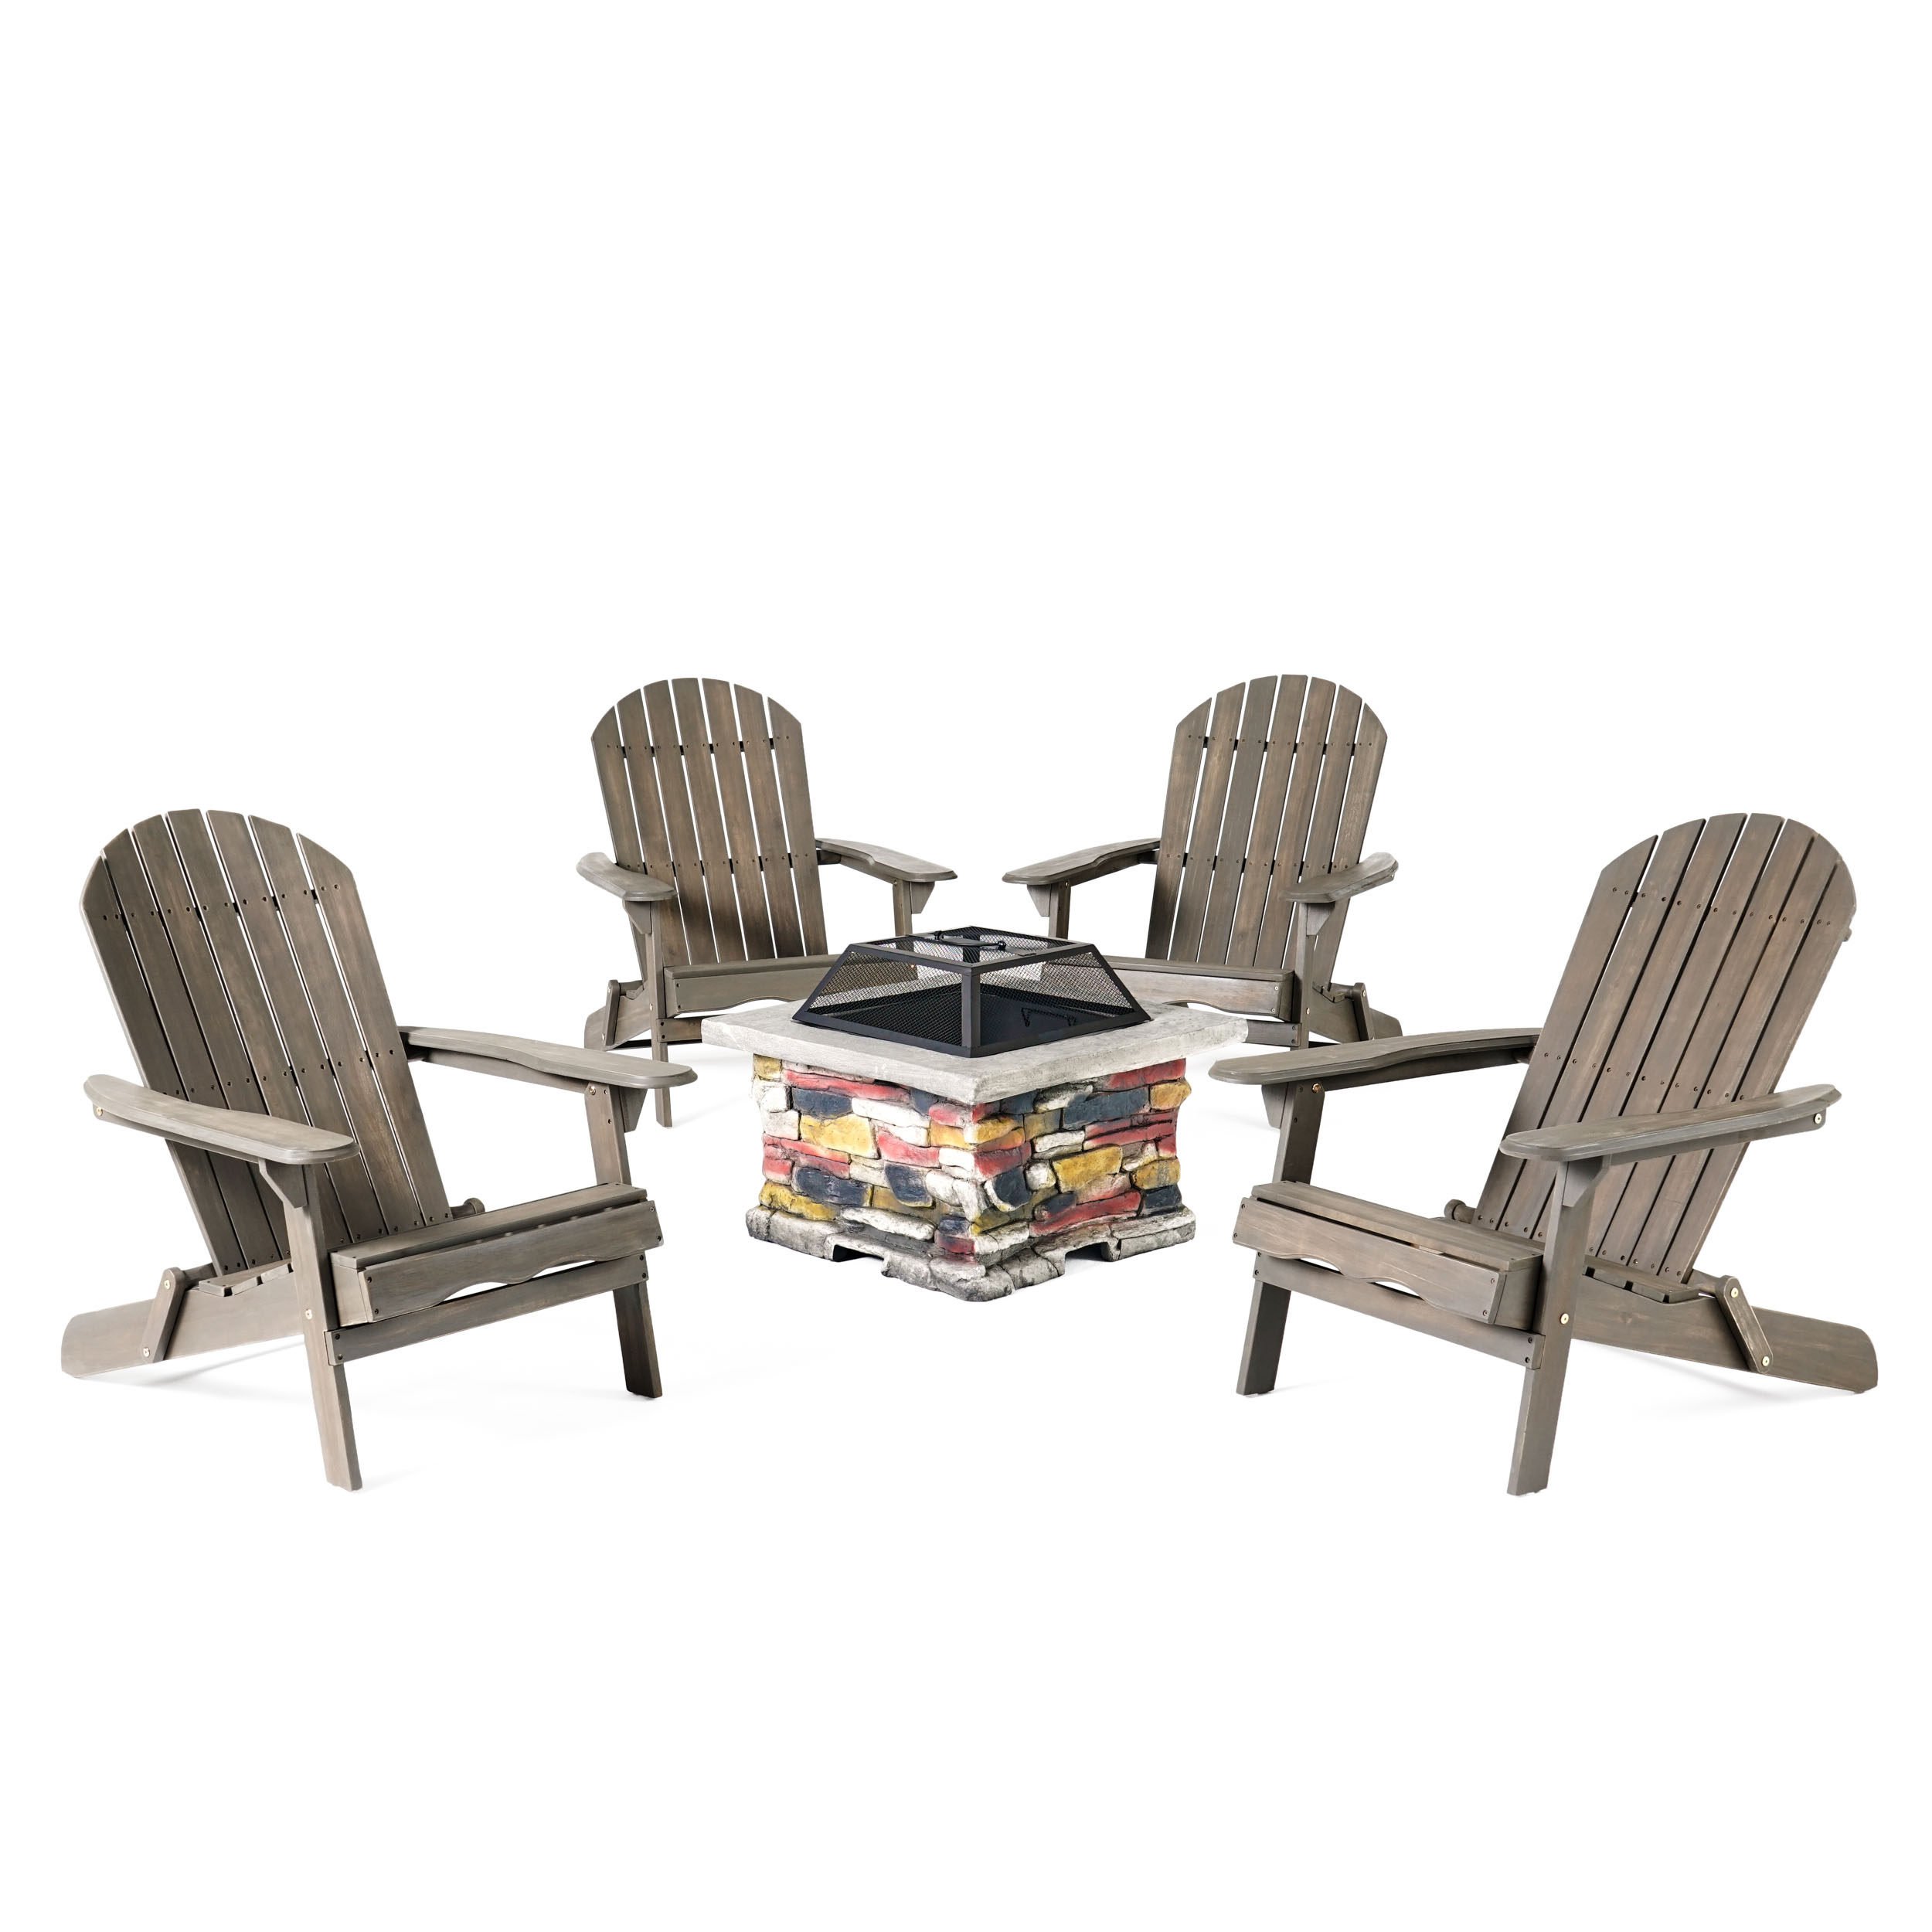 Benson Outdoor 5 Piece Acacia Wood/ Light Weight Concrete Adirondack Chair Set With Fire Pit - Grey